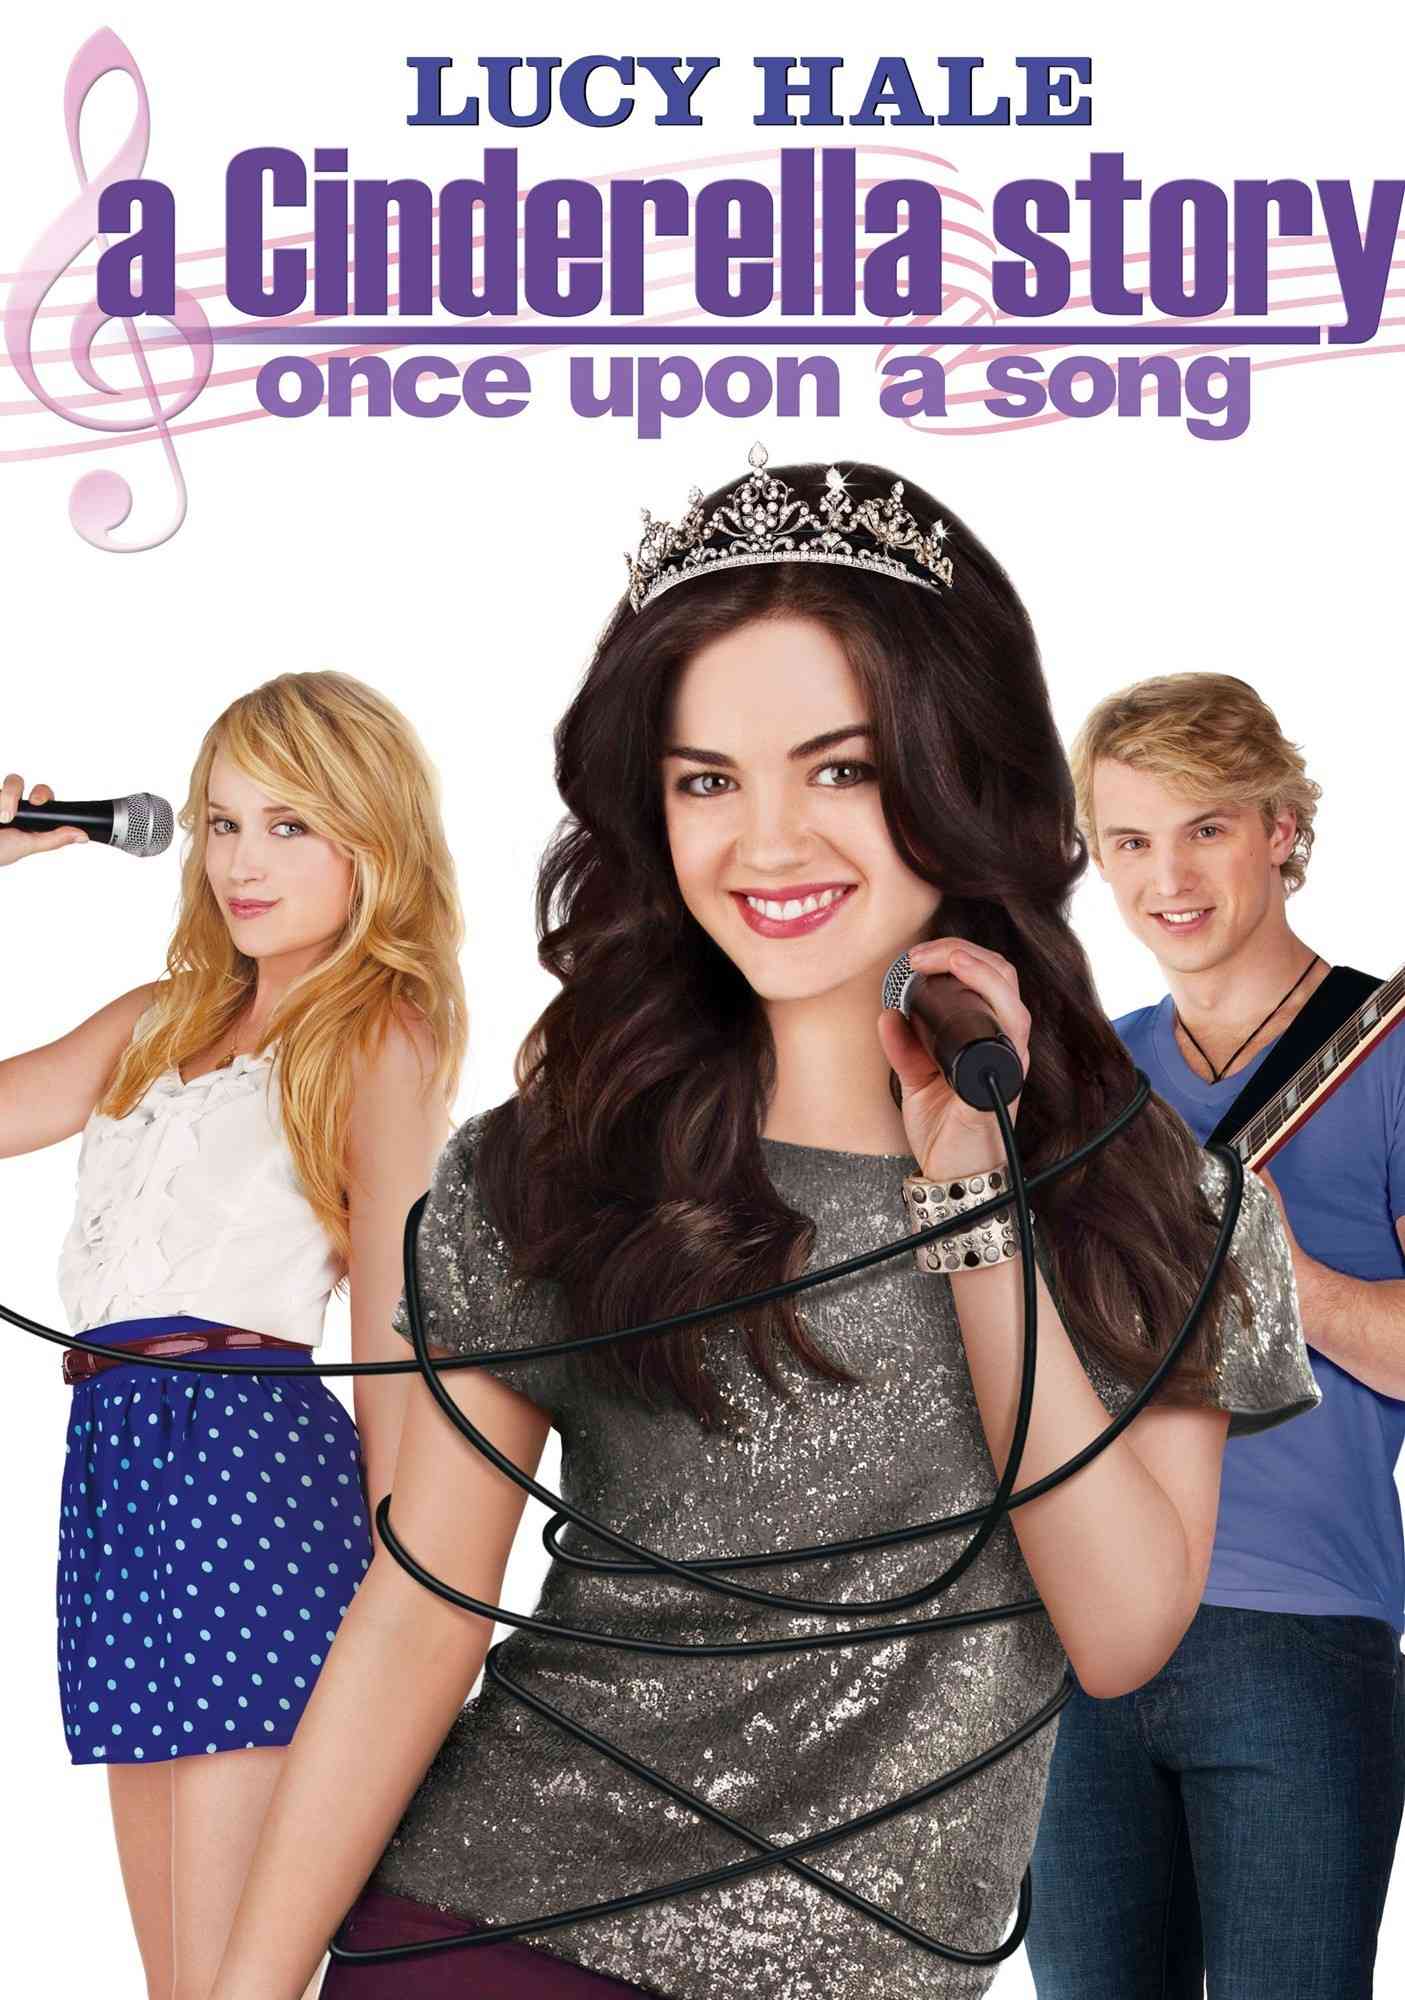 FULL MOVIE: A Cinderella Story: Once Upon A Song (2011)